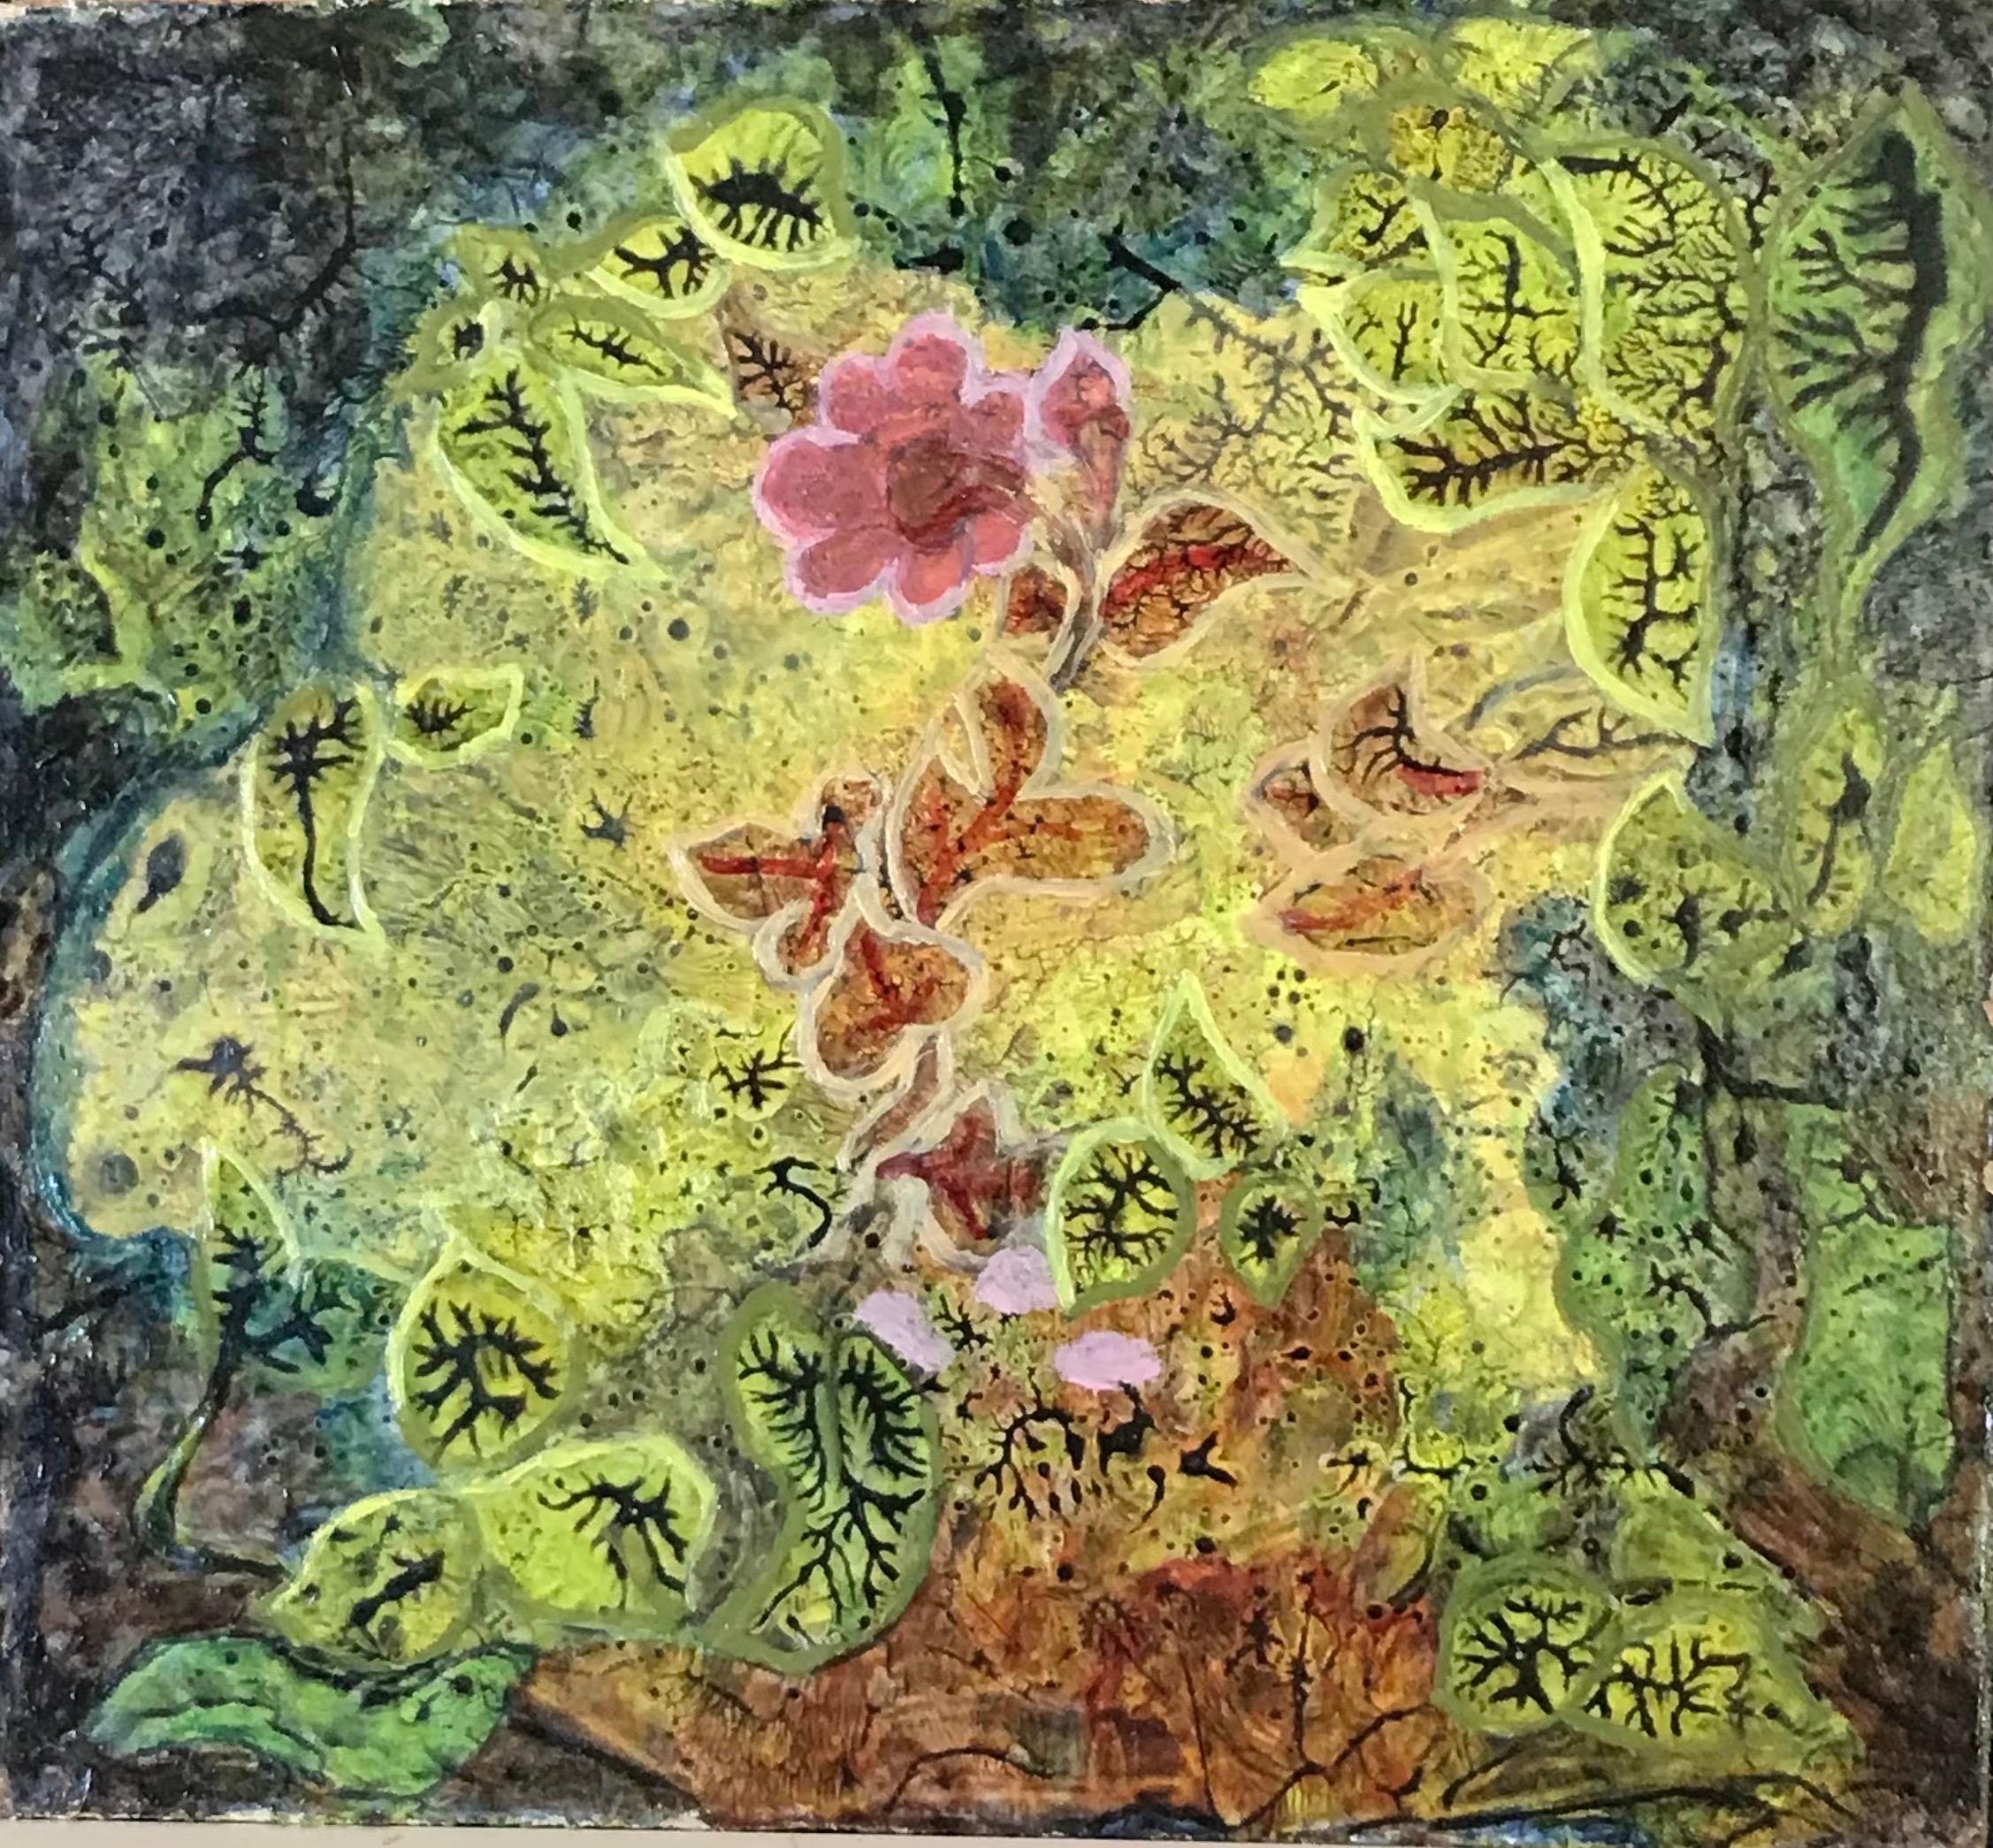 Elvic Steele Abstract Painting - 1960's British Surrealist Oil Painting - 'Bright Green Garden' Fantasy Abstract